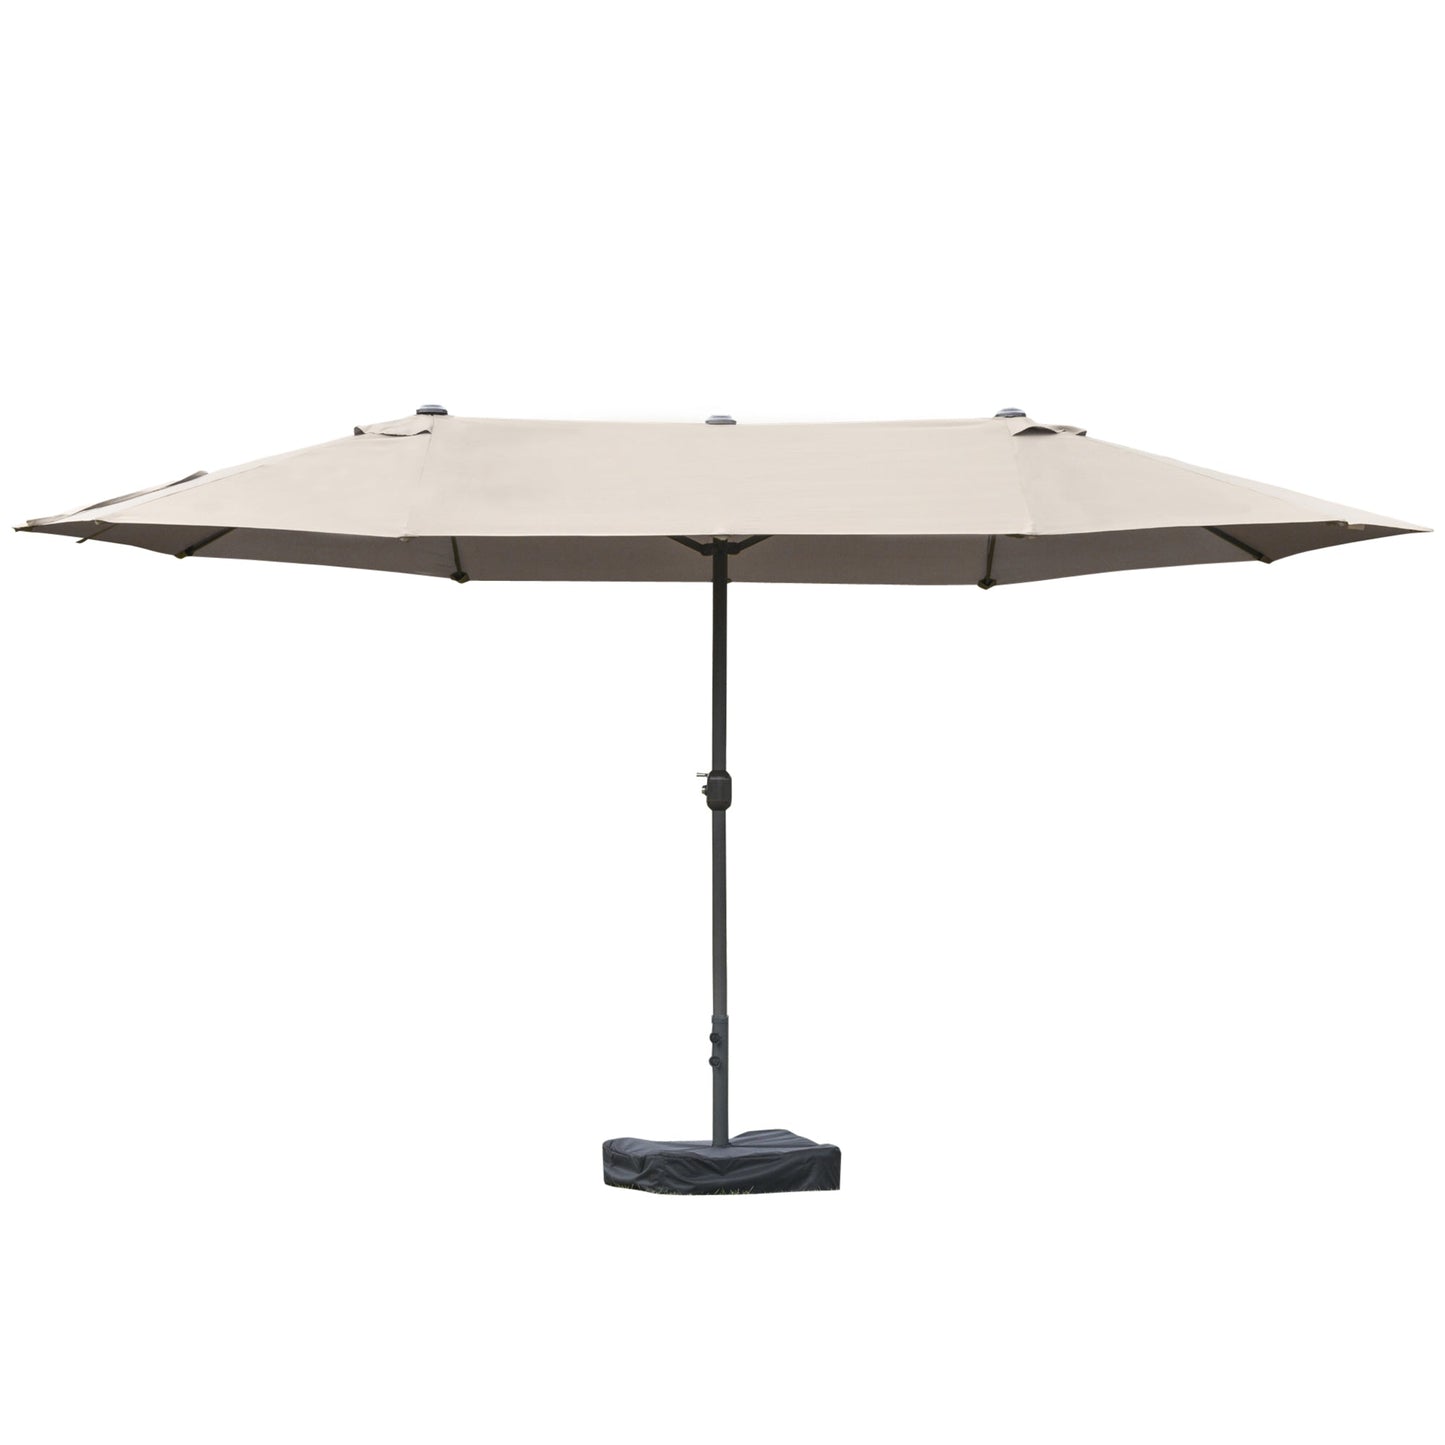 -Outsunny 15' Patio Umbrella with base, Rectangular Double Sided, UV Sun Protection & Easy Crank for Deck Pool, Coffee - Outdoor Style Company